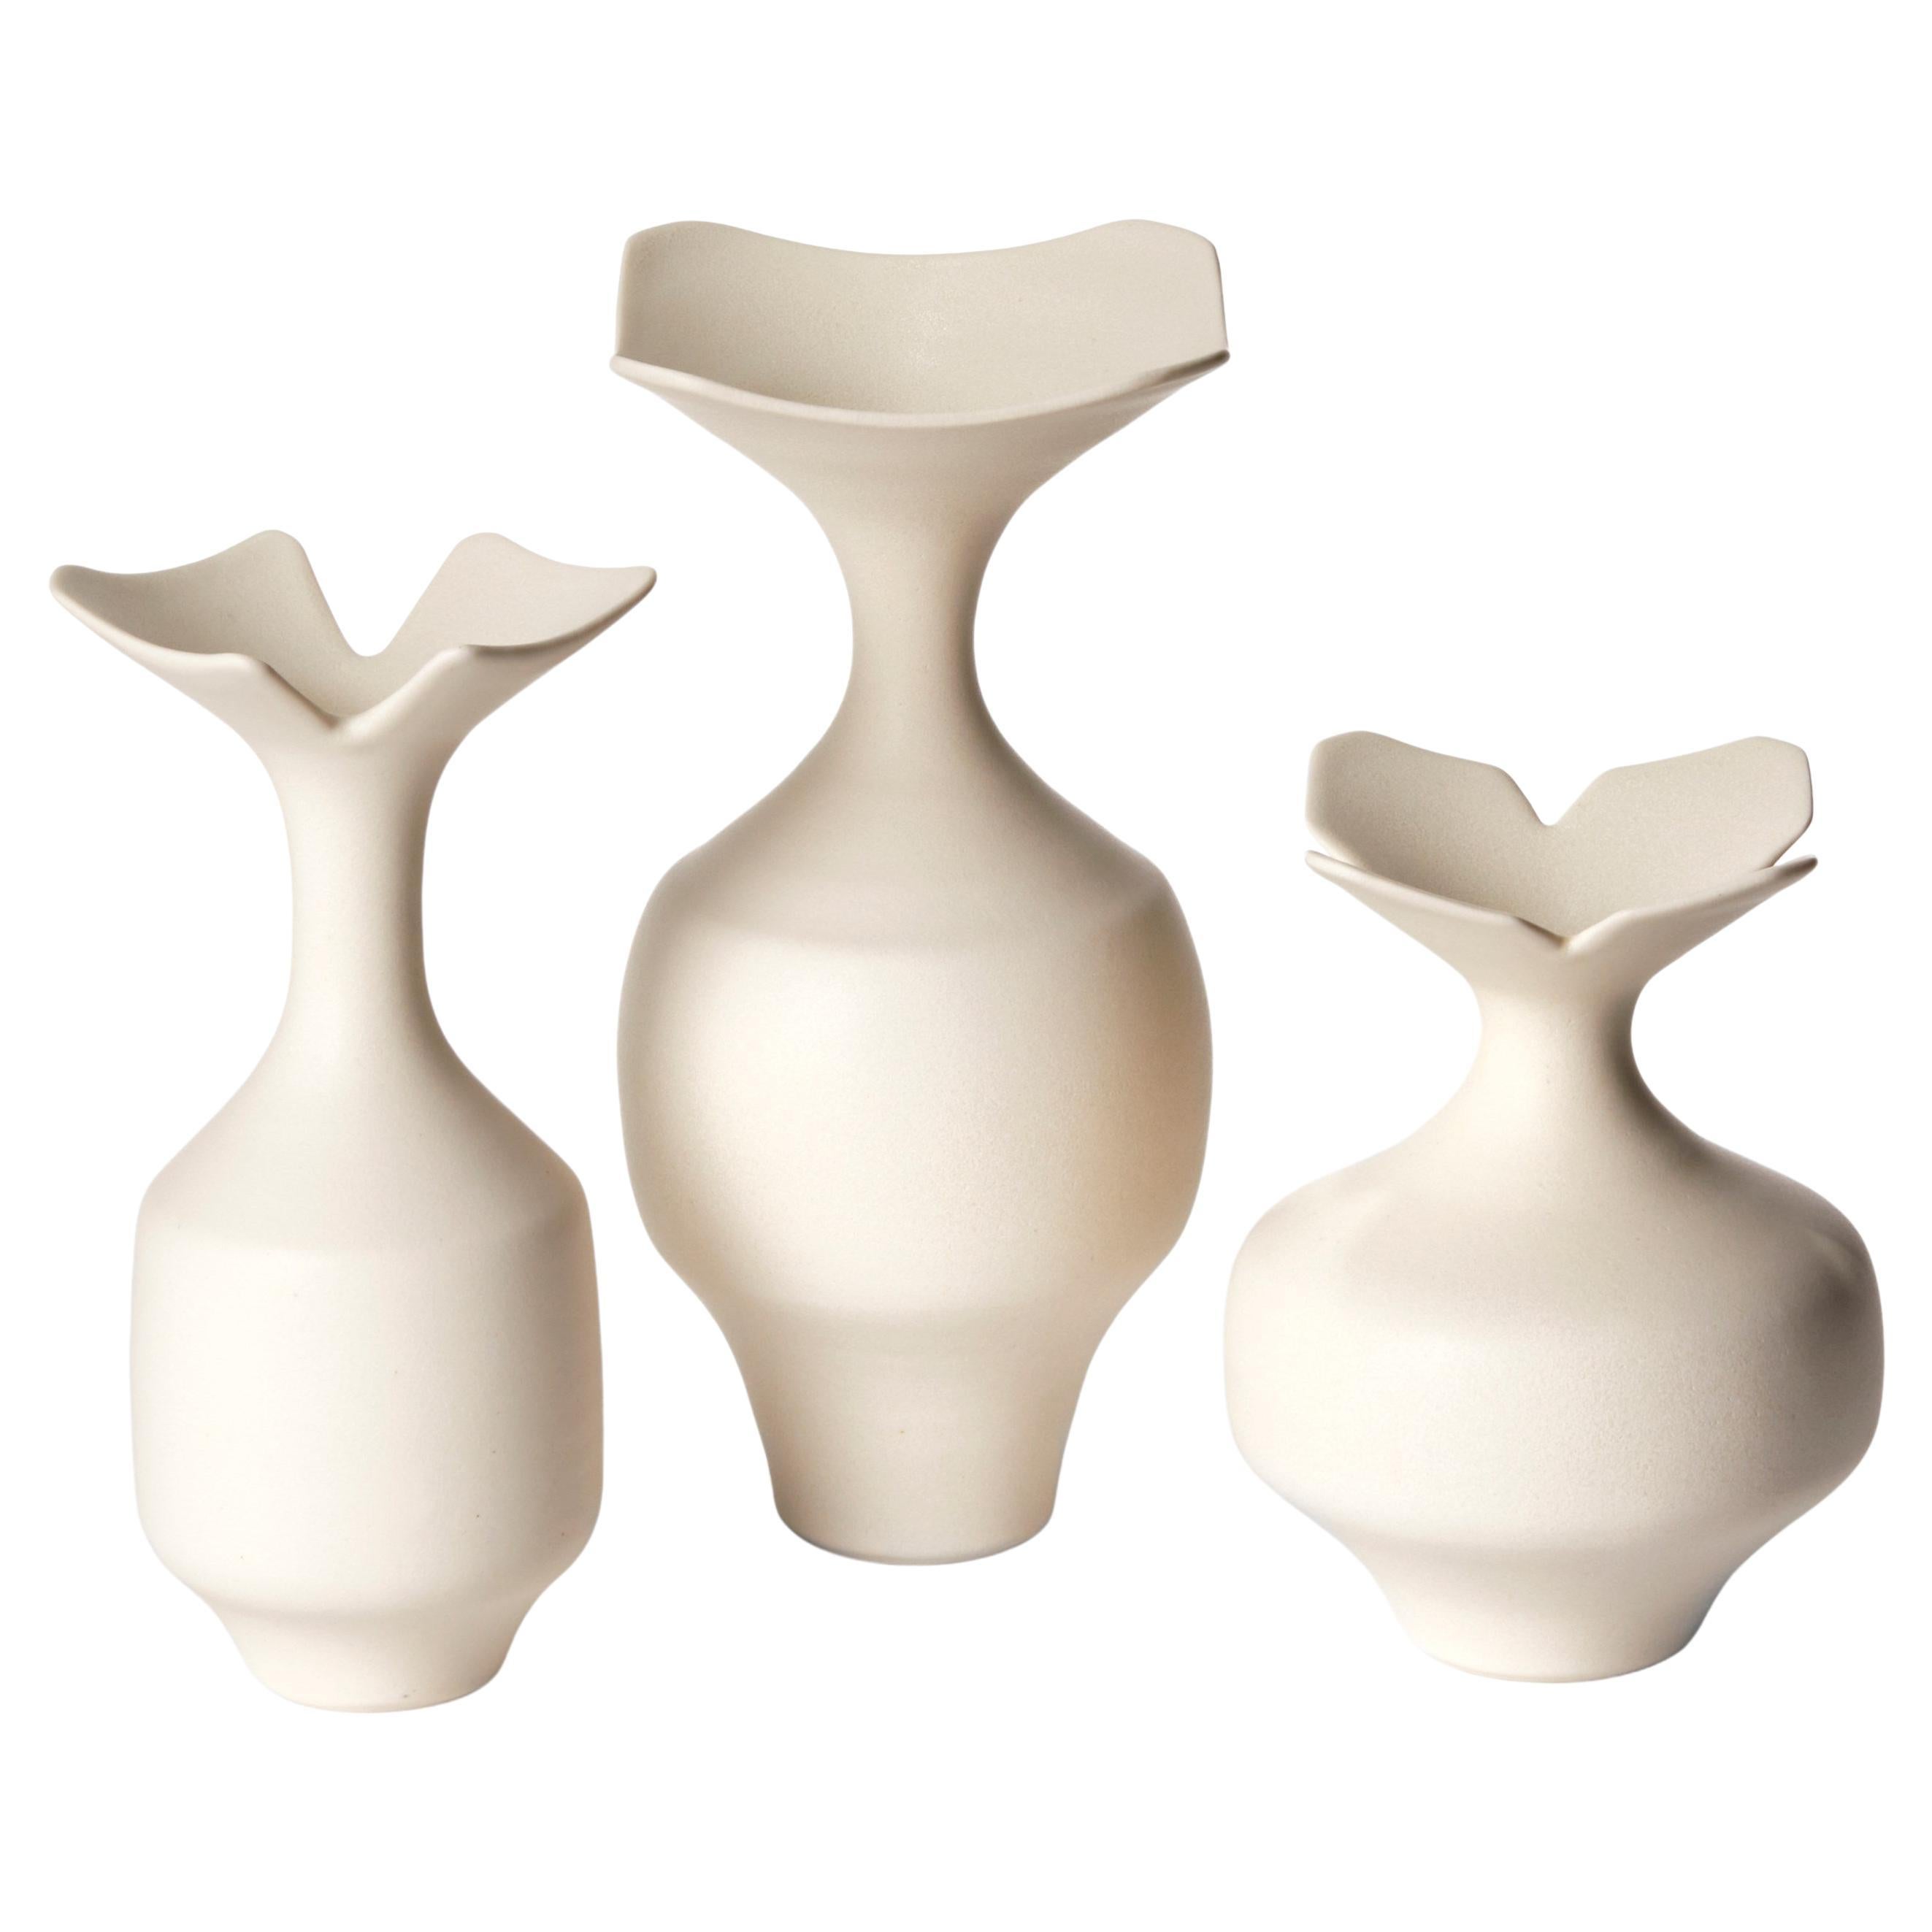  Butter Trio, set of three soft white / cream porcelain vases by Vivienne Foley For Sale